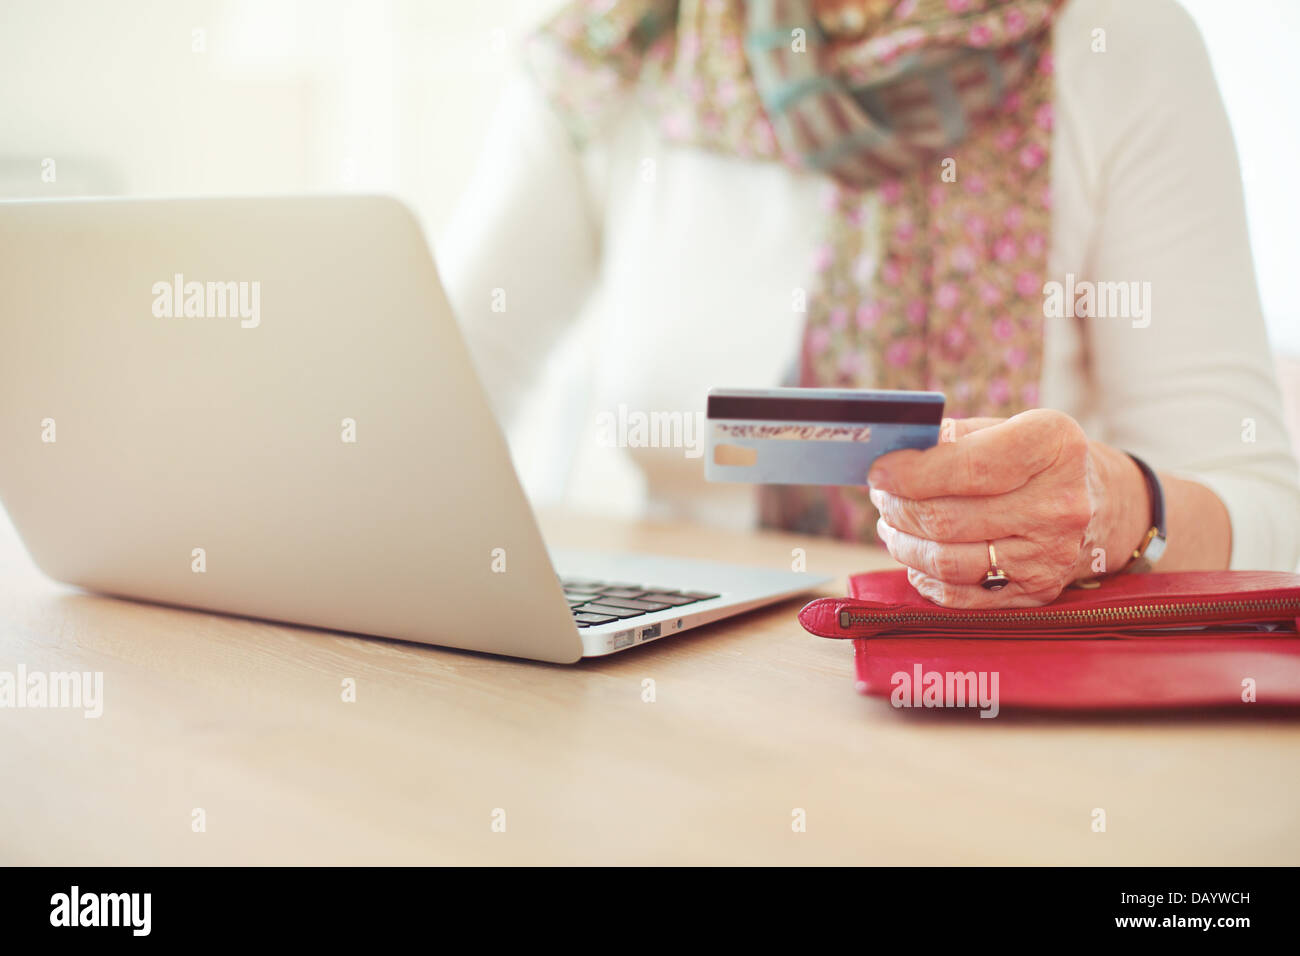 Senior woman's hand holding a credit card while in front of the laptop shopping online Stock Photo